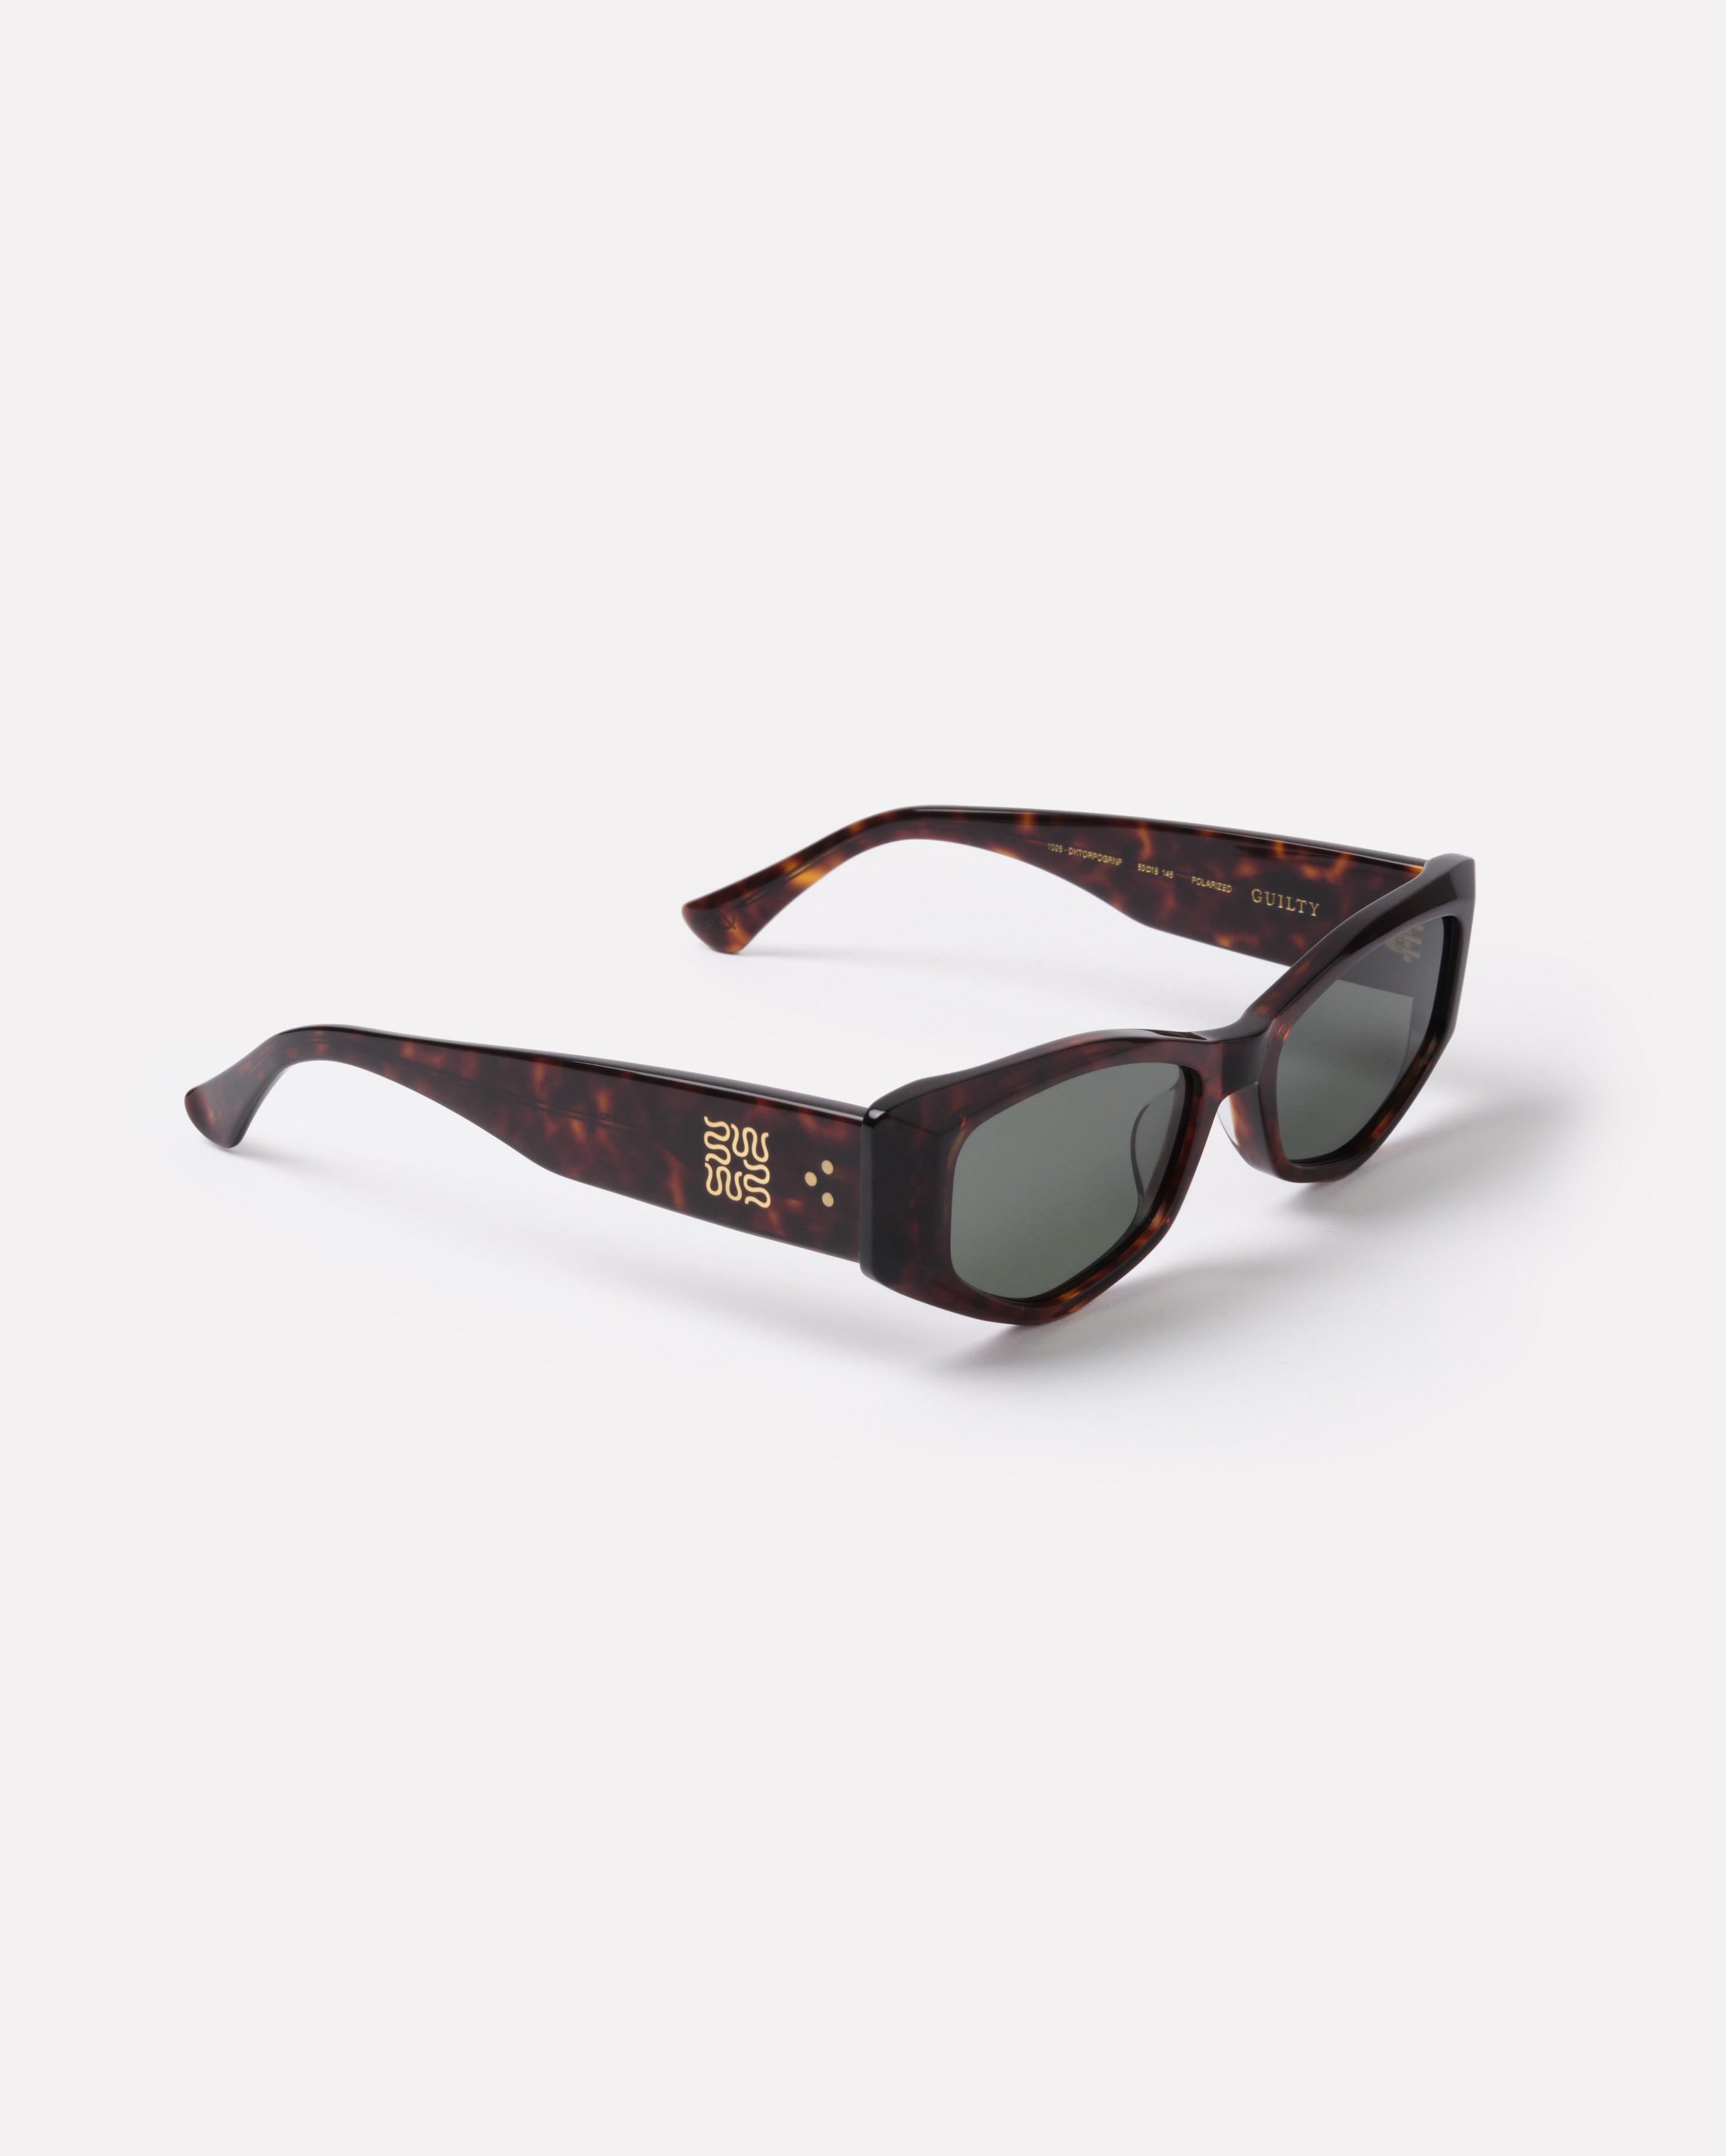 GUILTY x Wasted Talent - Tortoise Polished / Green Polarized